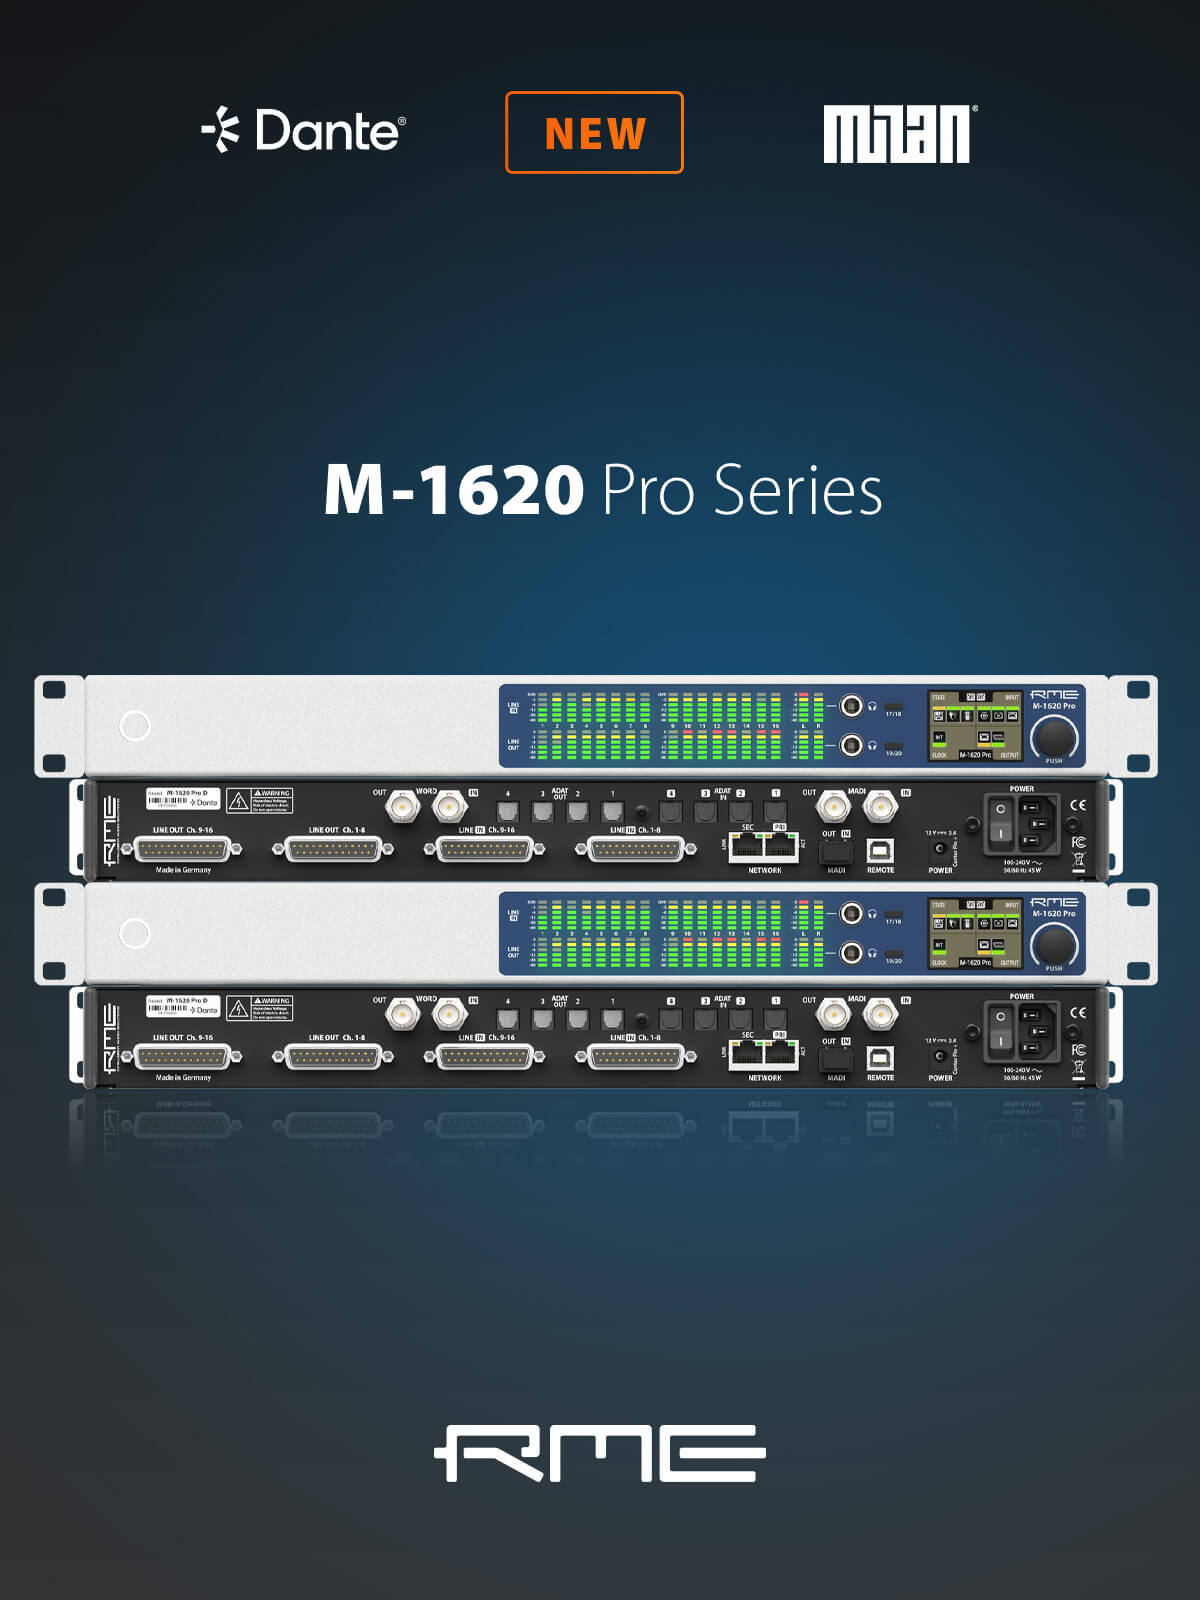 High-end 36-Channel AD/DA Converter Series with ADAT, MADI, Milan or Dante